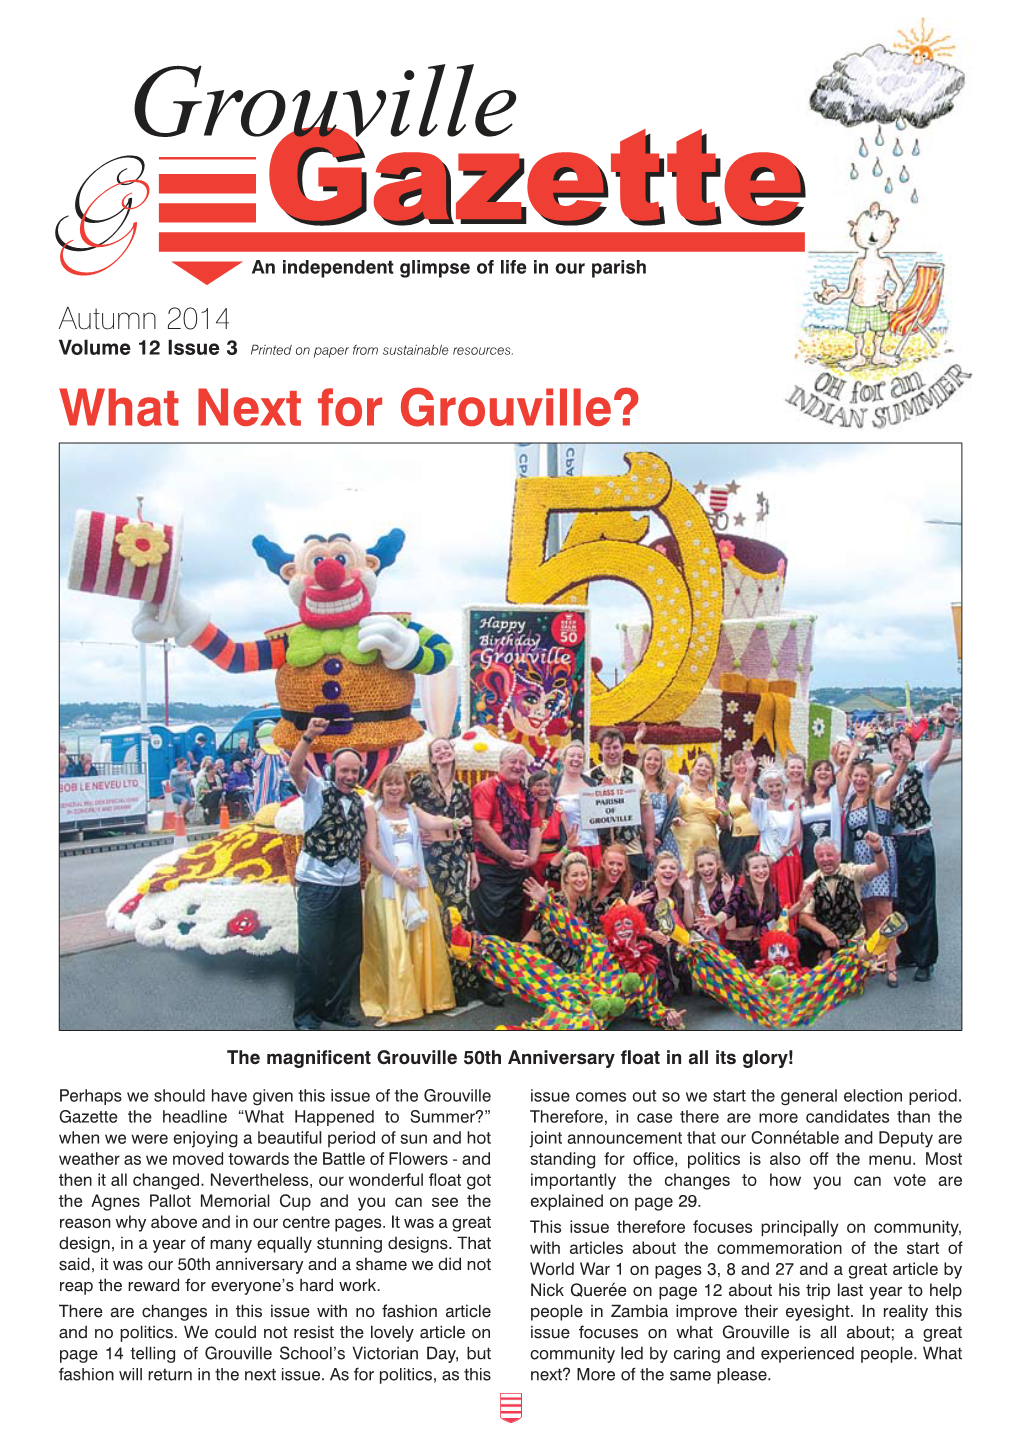 Grouville Gazettegazette an Independent Glimpse of Life in Our Parish Autumn 2014 Volume 12 Issue 3 Printed on Paper from Sustainable Resources